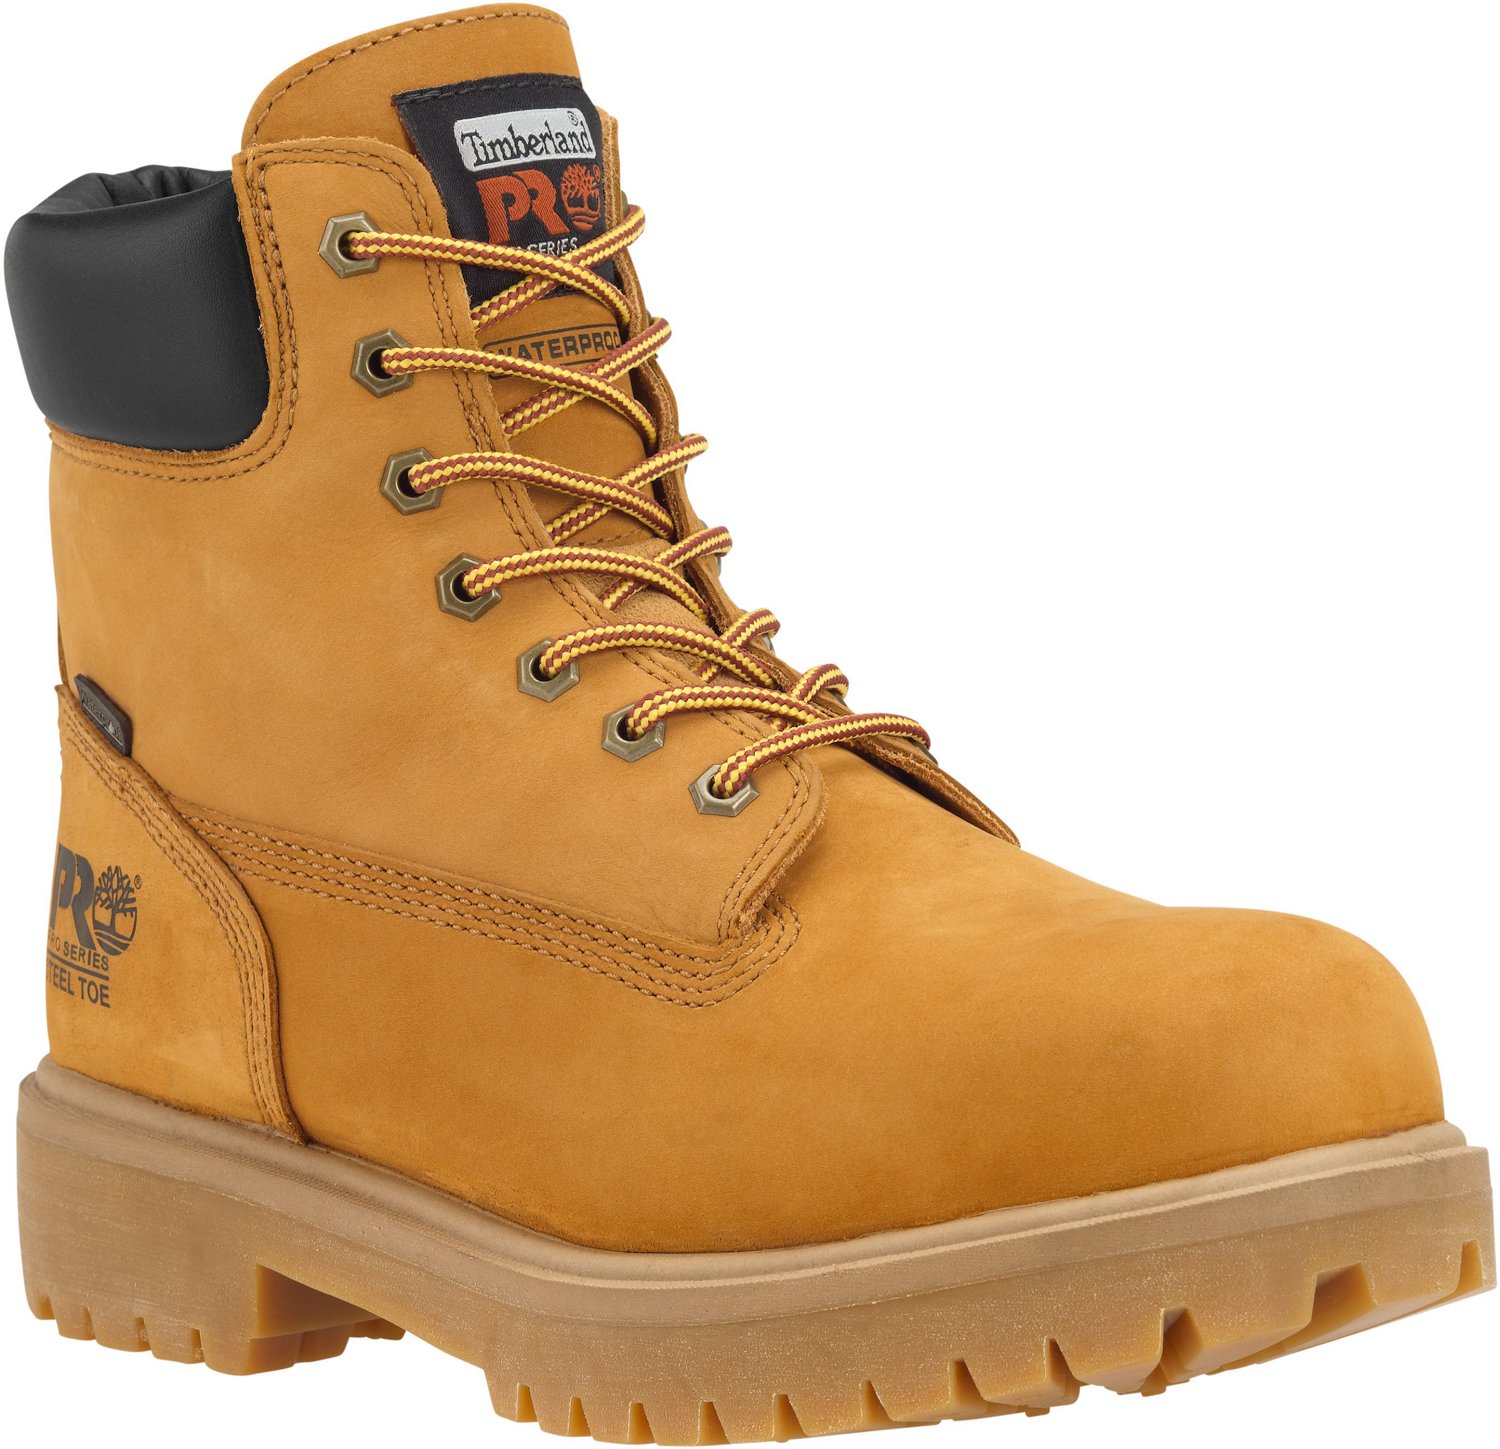 Timberland Pro Direct Attach EH SR Steel Toe Lace Up Work Boots | Academy